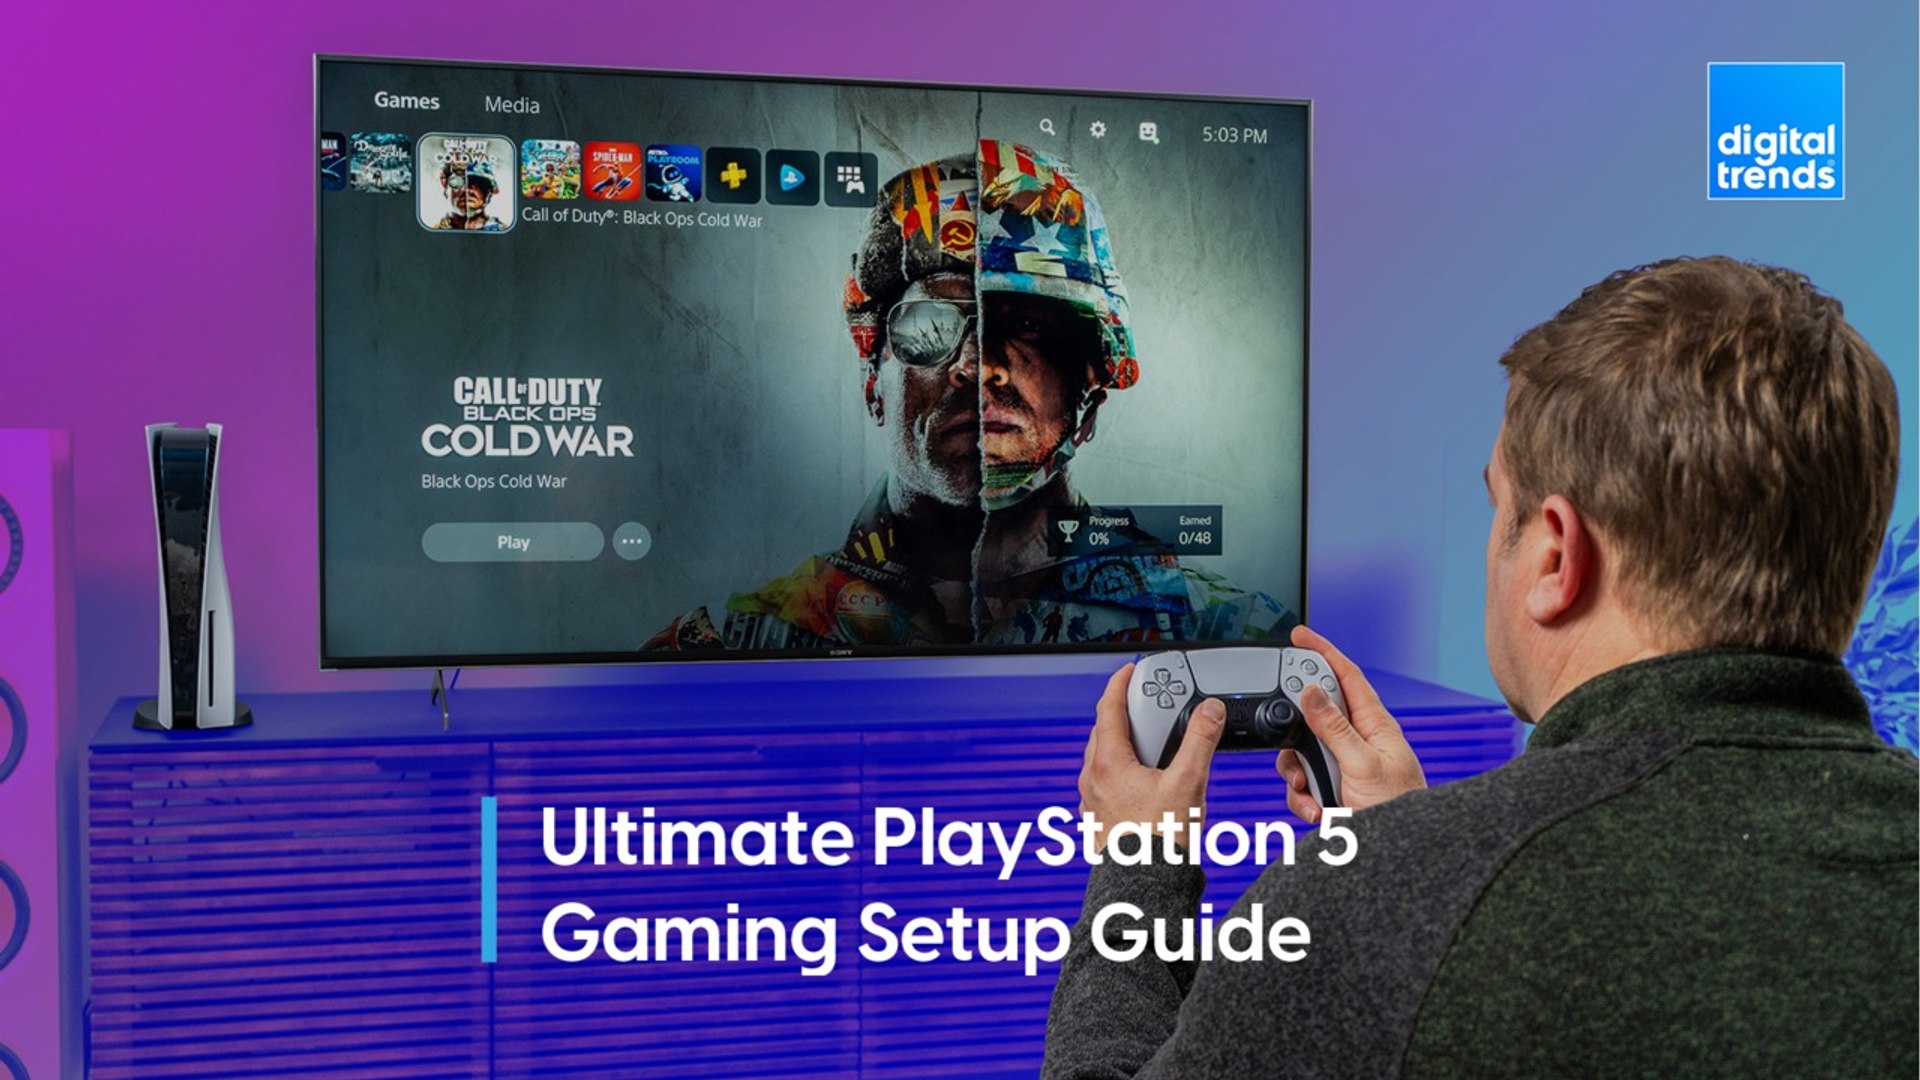 Ultimate PlayStation 5 gaming setup guide - video Dailymotion